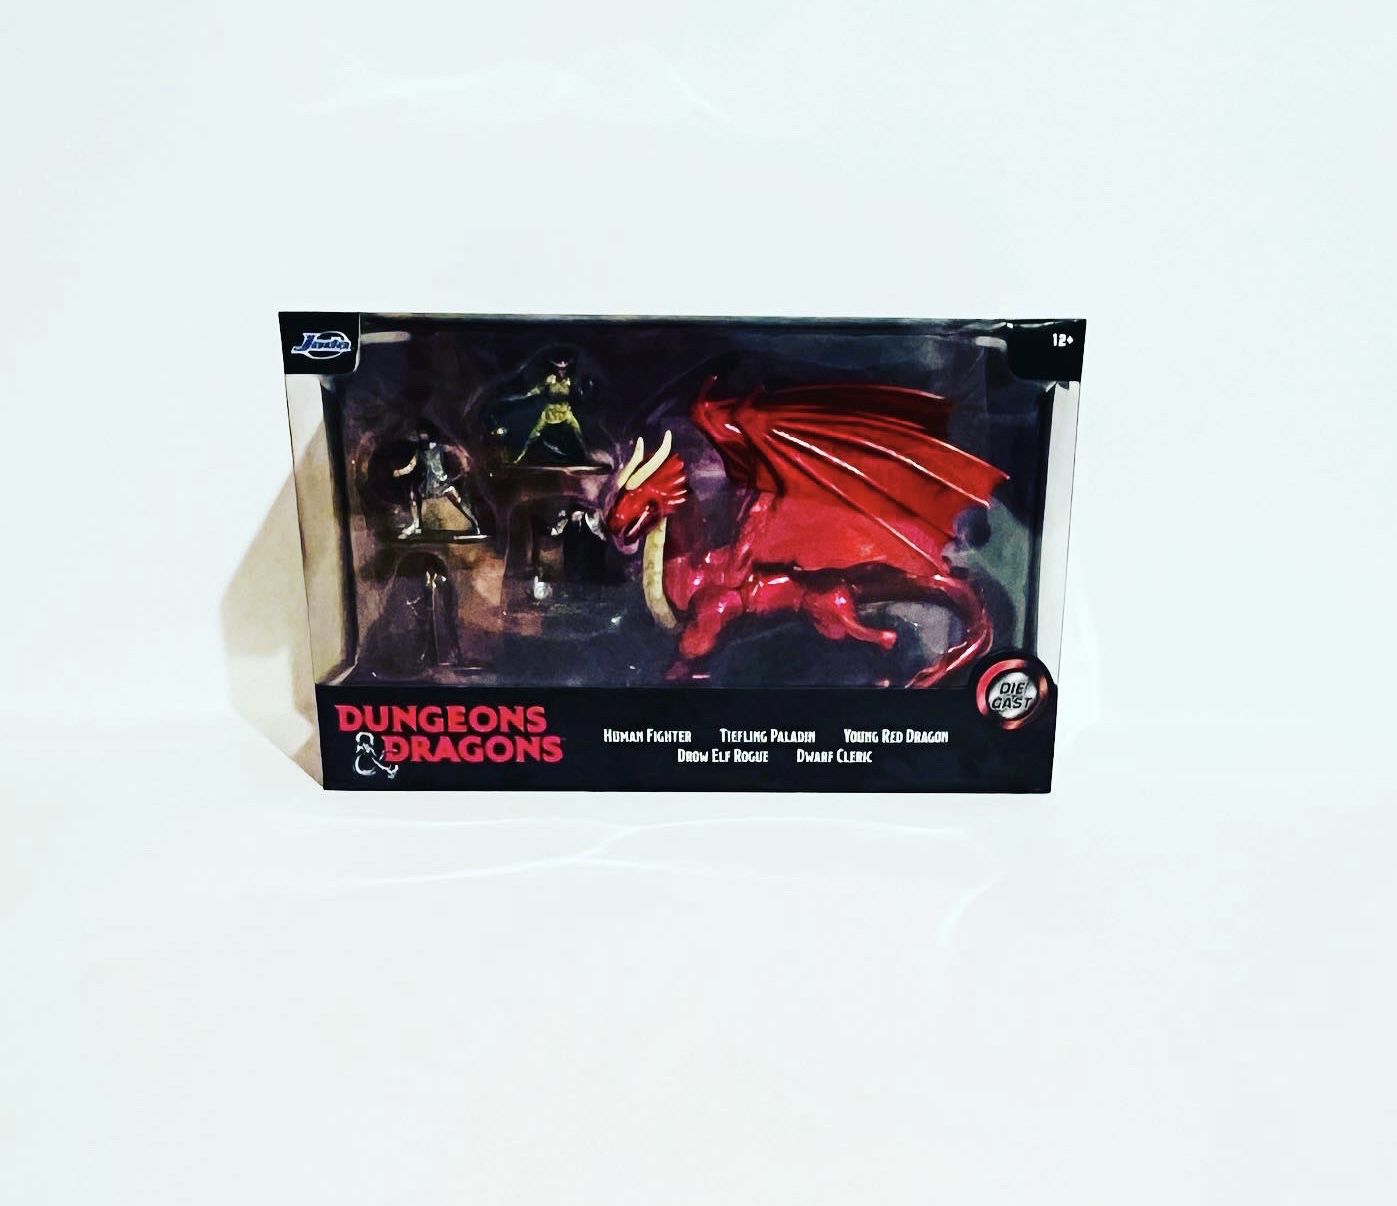 NIB Dungeons and Dragons 1.65” Die-Cast Metal Collectible Figure Deluxe 5-Pack